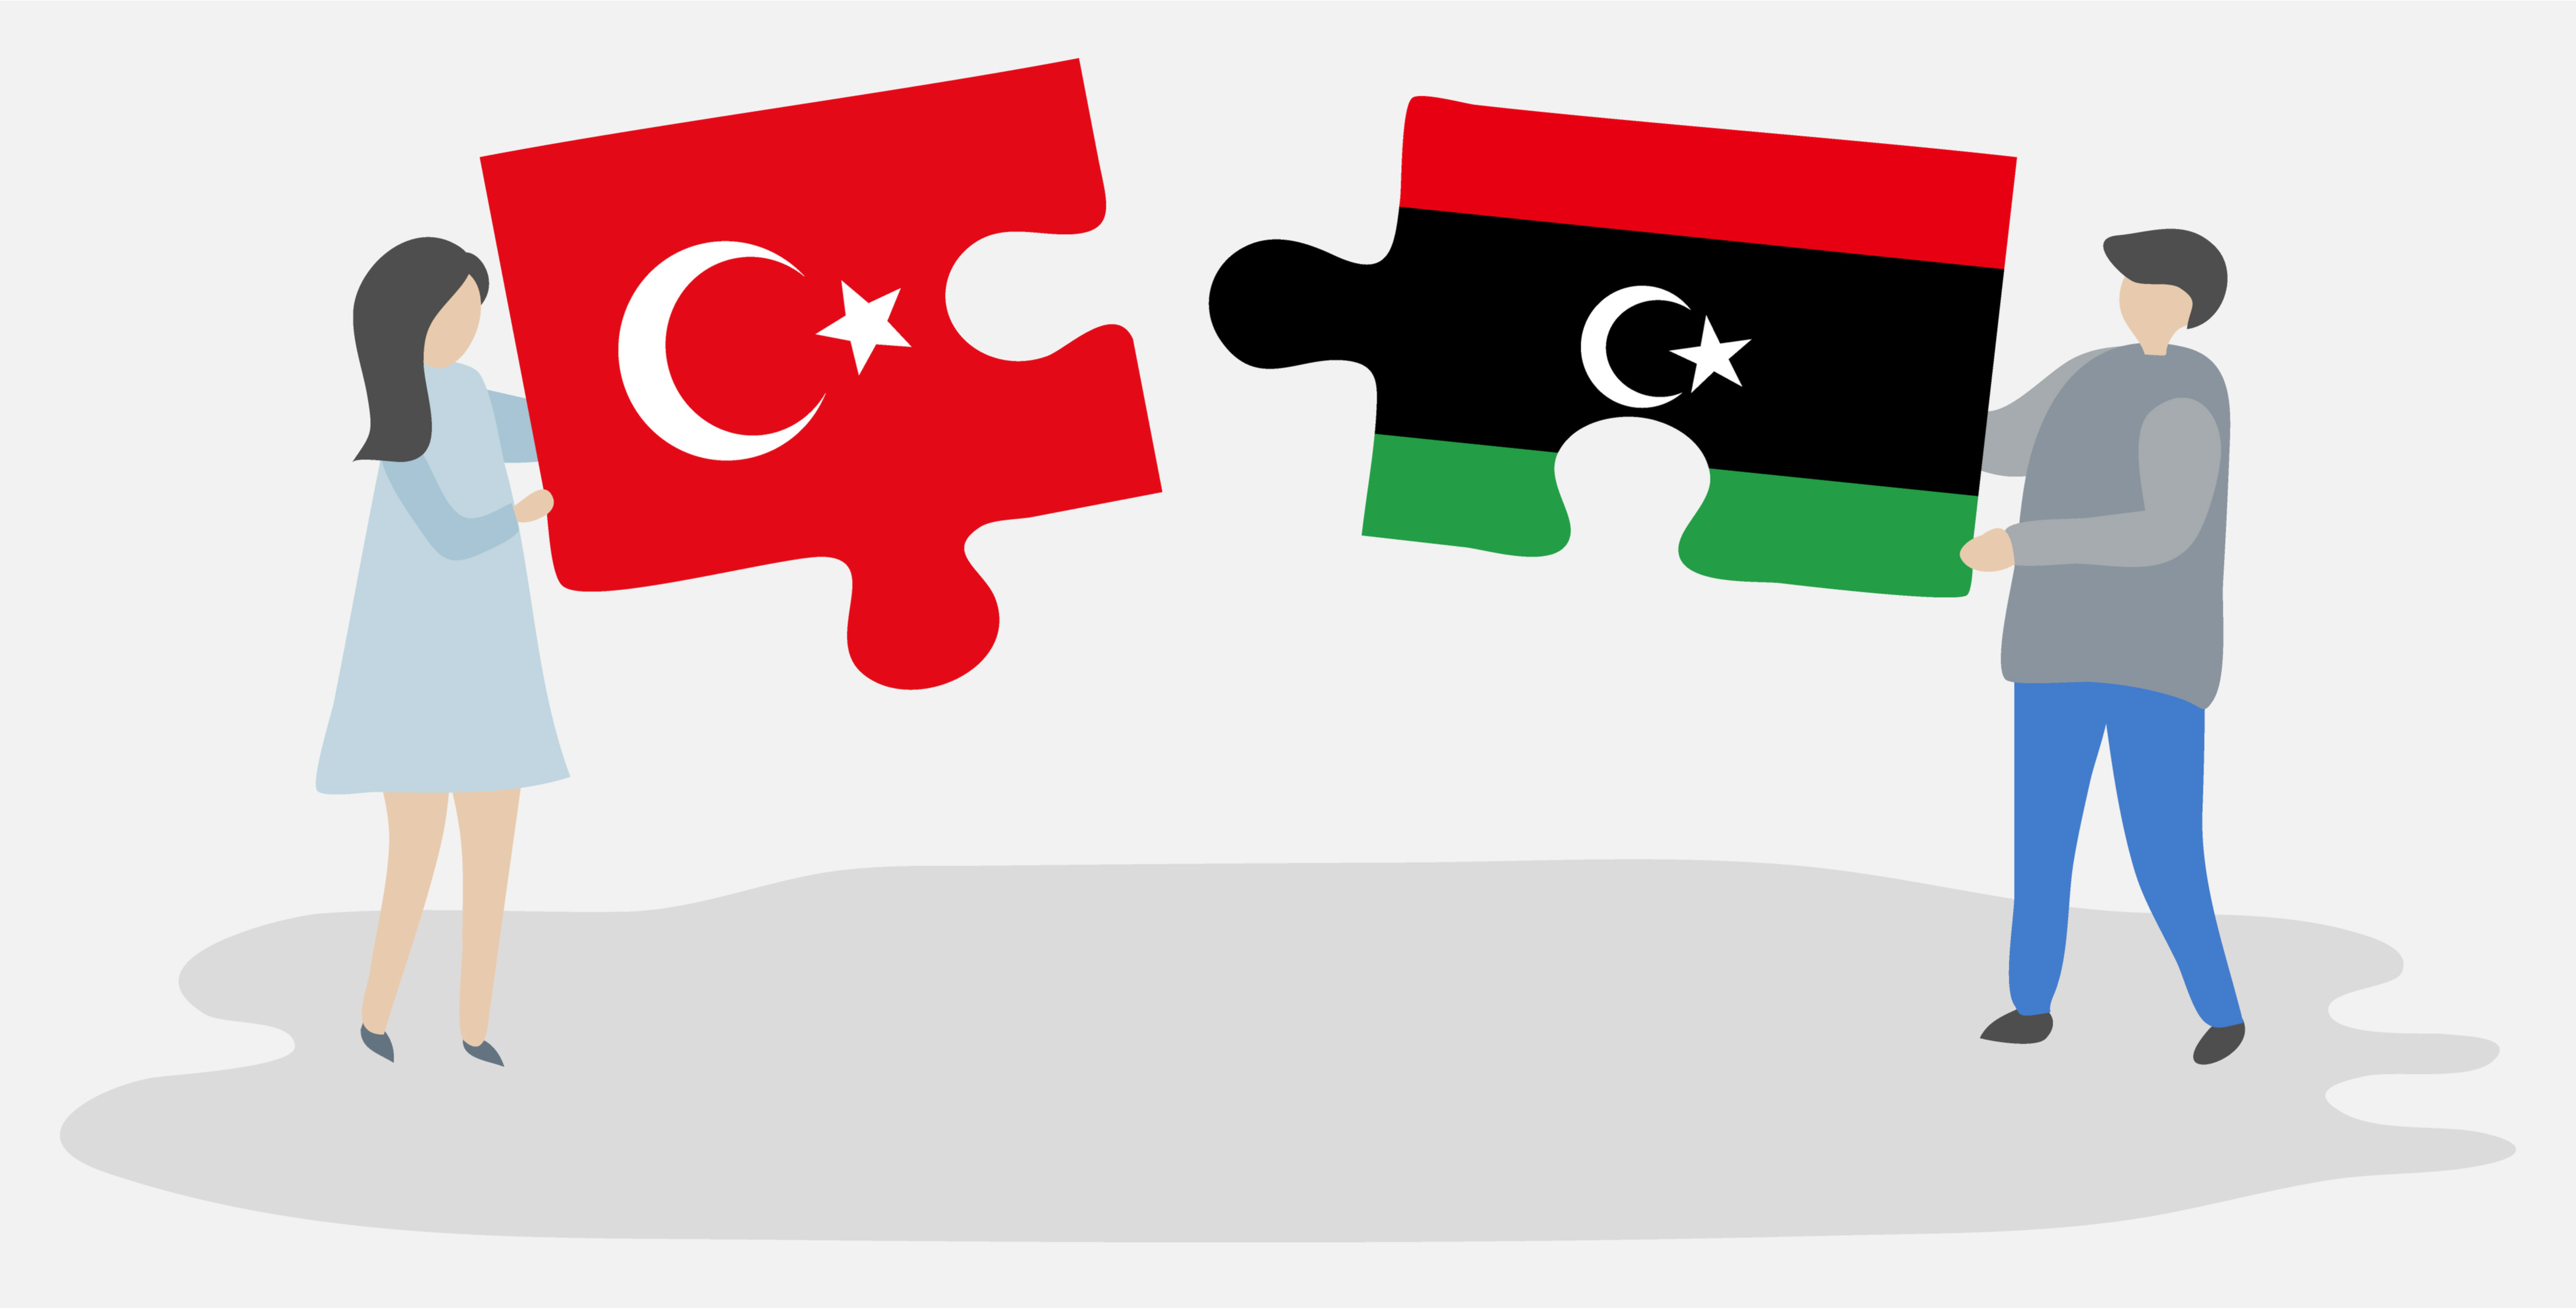 So what is the connection between Turkey and Libya? Well, find out about that with these Arabic words in Libyan Arabic but originally Turkish.